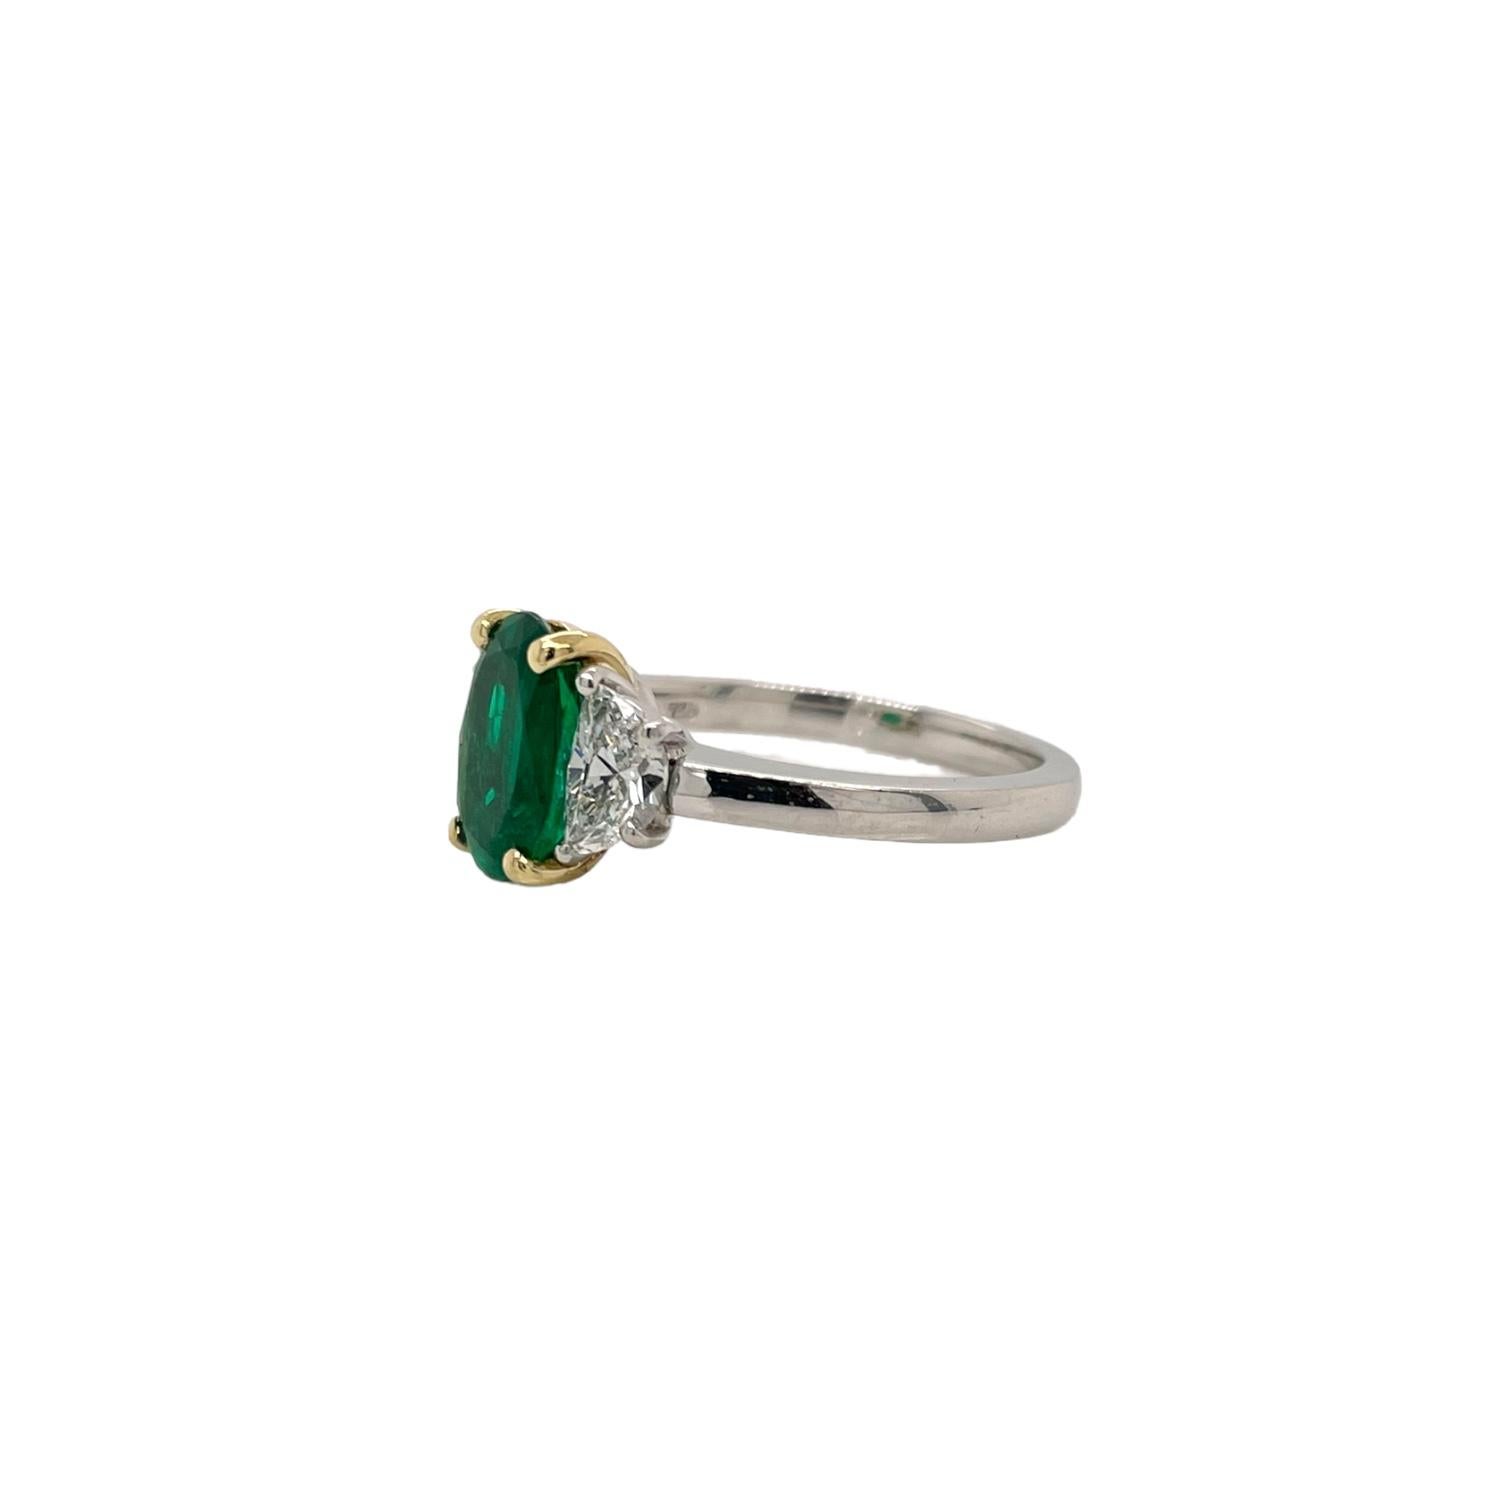 Ring contains one AGL certified Colombian green emerald, 1.70ct and two side half-moon cut diamonds, 0.70tcw.
Diamonds are G in color and VS2 in clarity. Stones are mounted in a handmade basket prong setting in 18k yellow gold and platinum band.